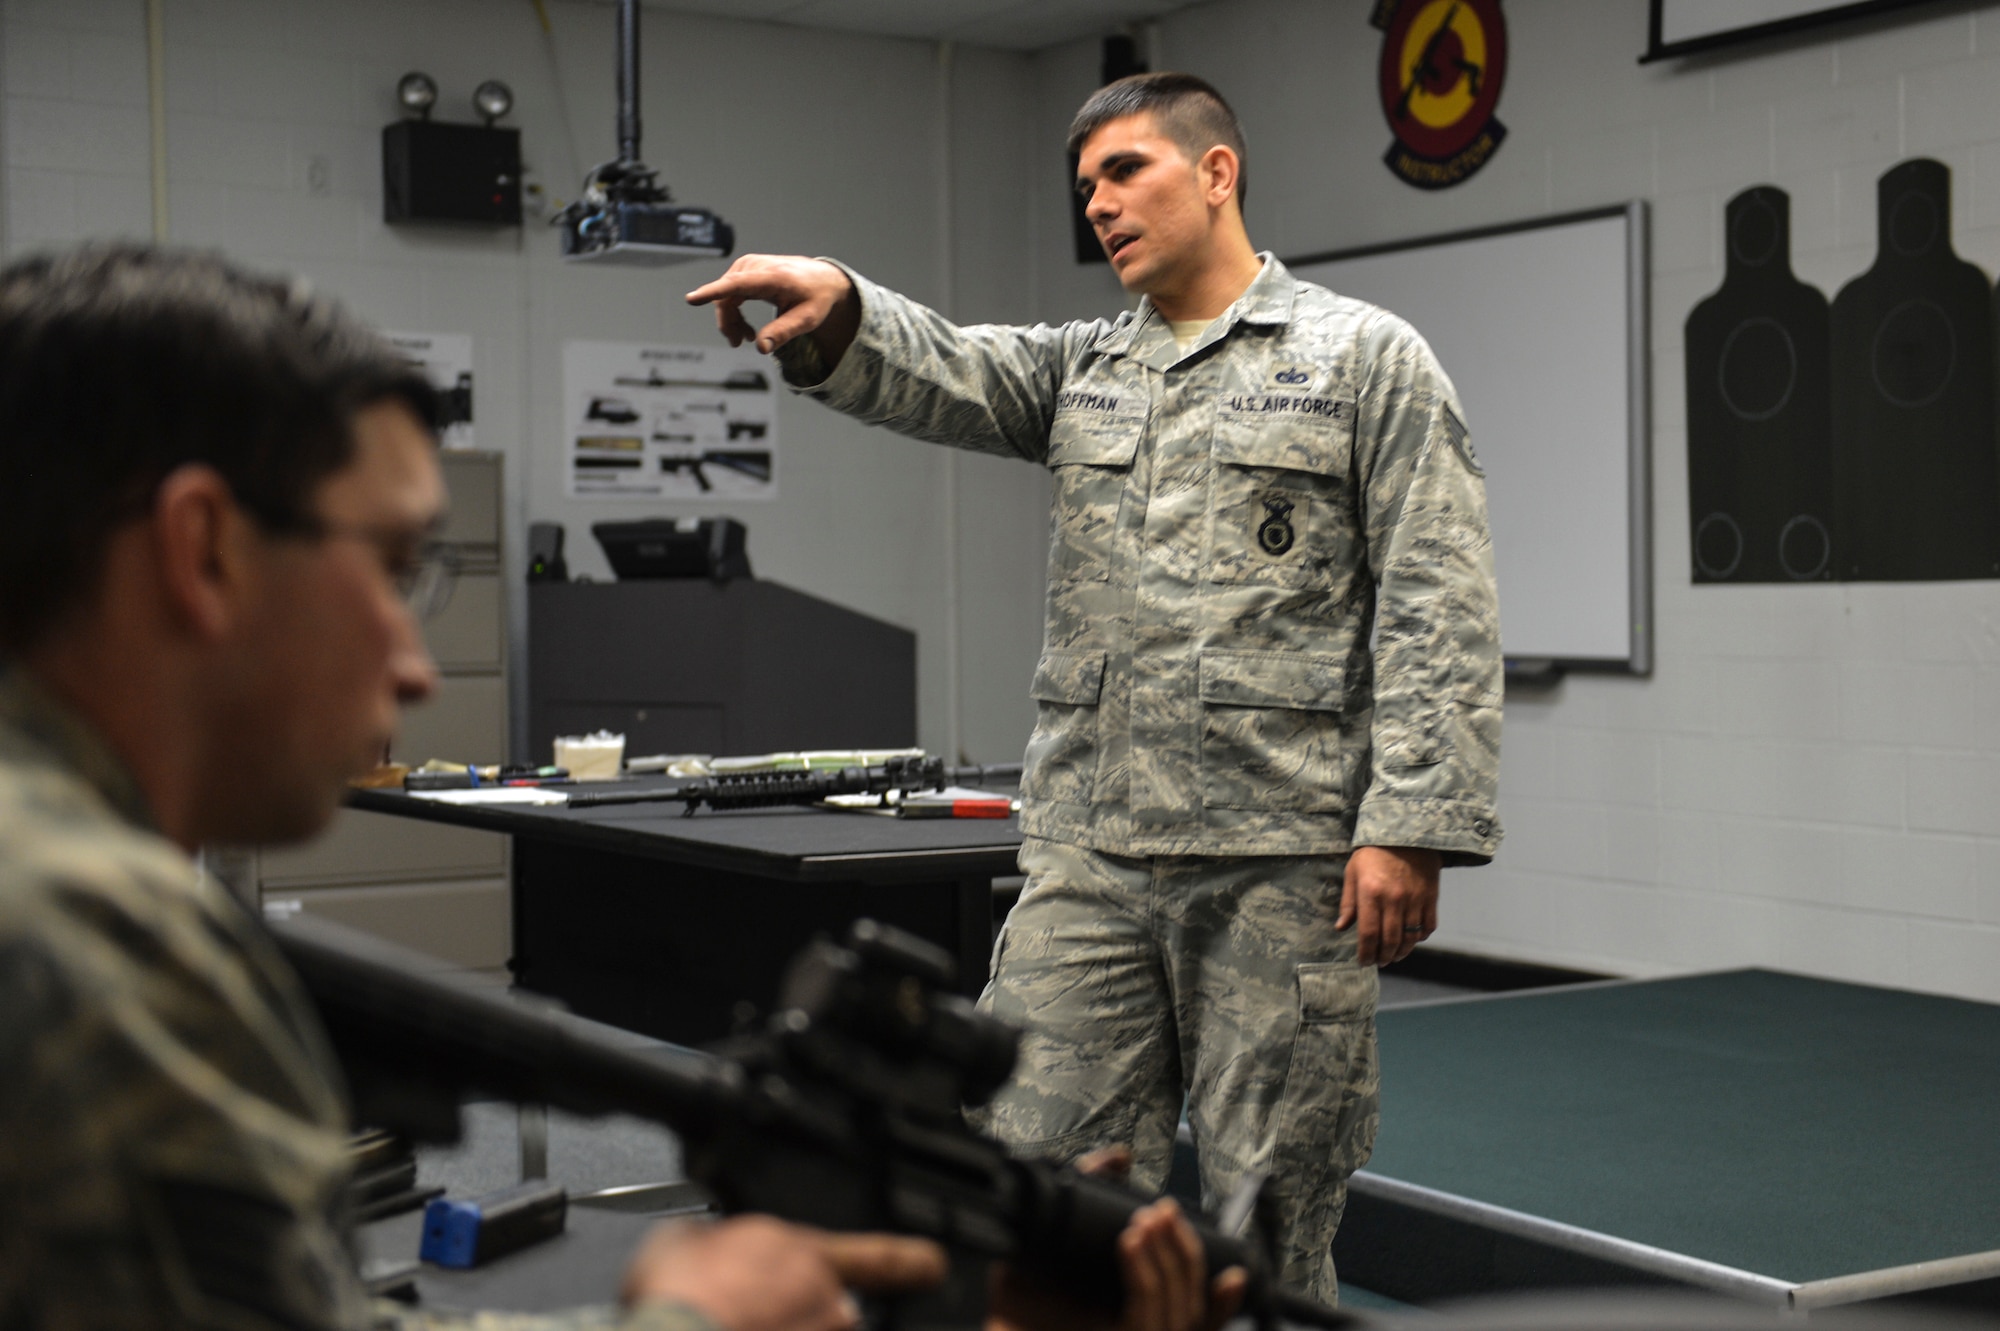 Staff Sgt. Christopher Hoffman, 627th Security Forces Squadron combat arms instructor educates McChord Field Airmen proper technique for reloading the M-4 carbine rifle, April 9, 2014 at Joint Base Lewis-McChord, Wash. In the classroom, McChord Field Airmen gain in-depth knowledge of the M-4 carbine rifle including safety, inspecting, and cleaning. (U.S. Air Force photo/Staff Sgt. Russ Jackson)